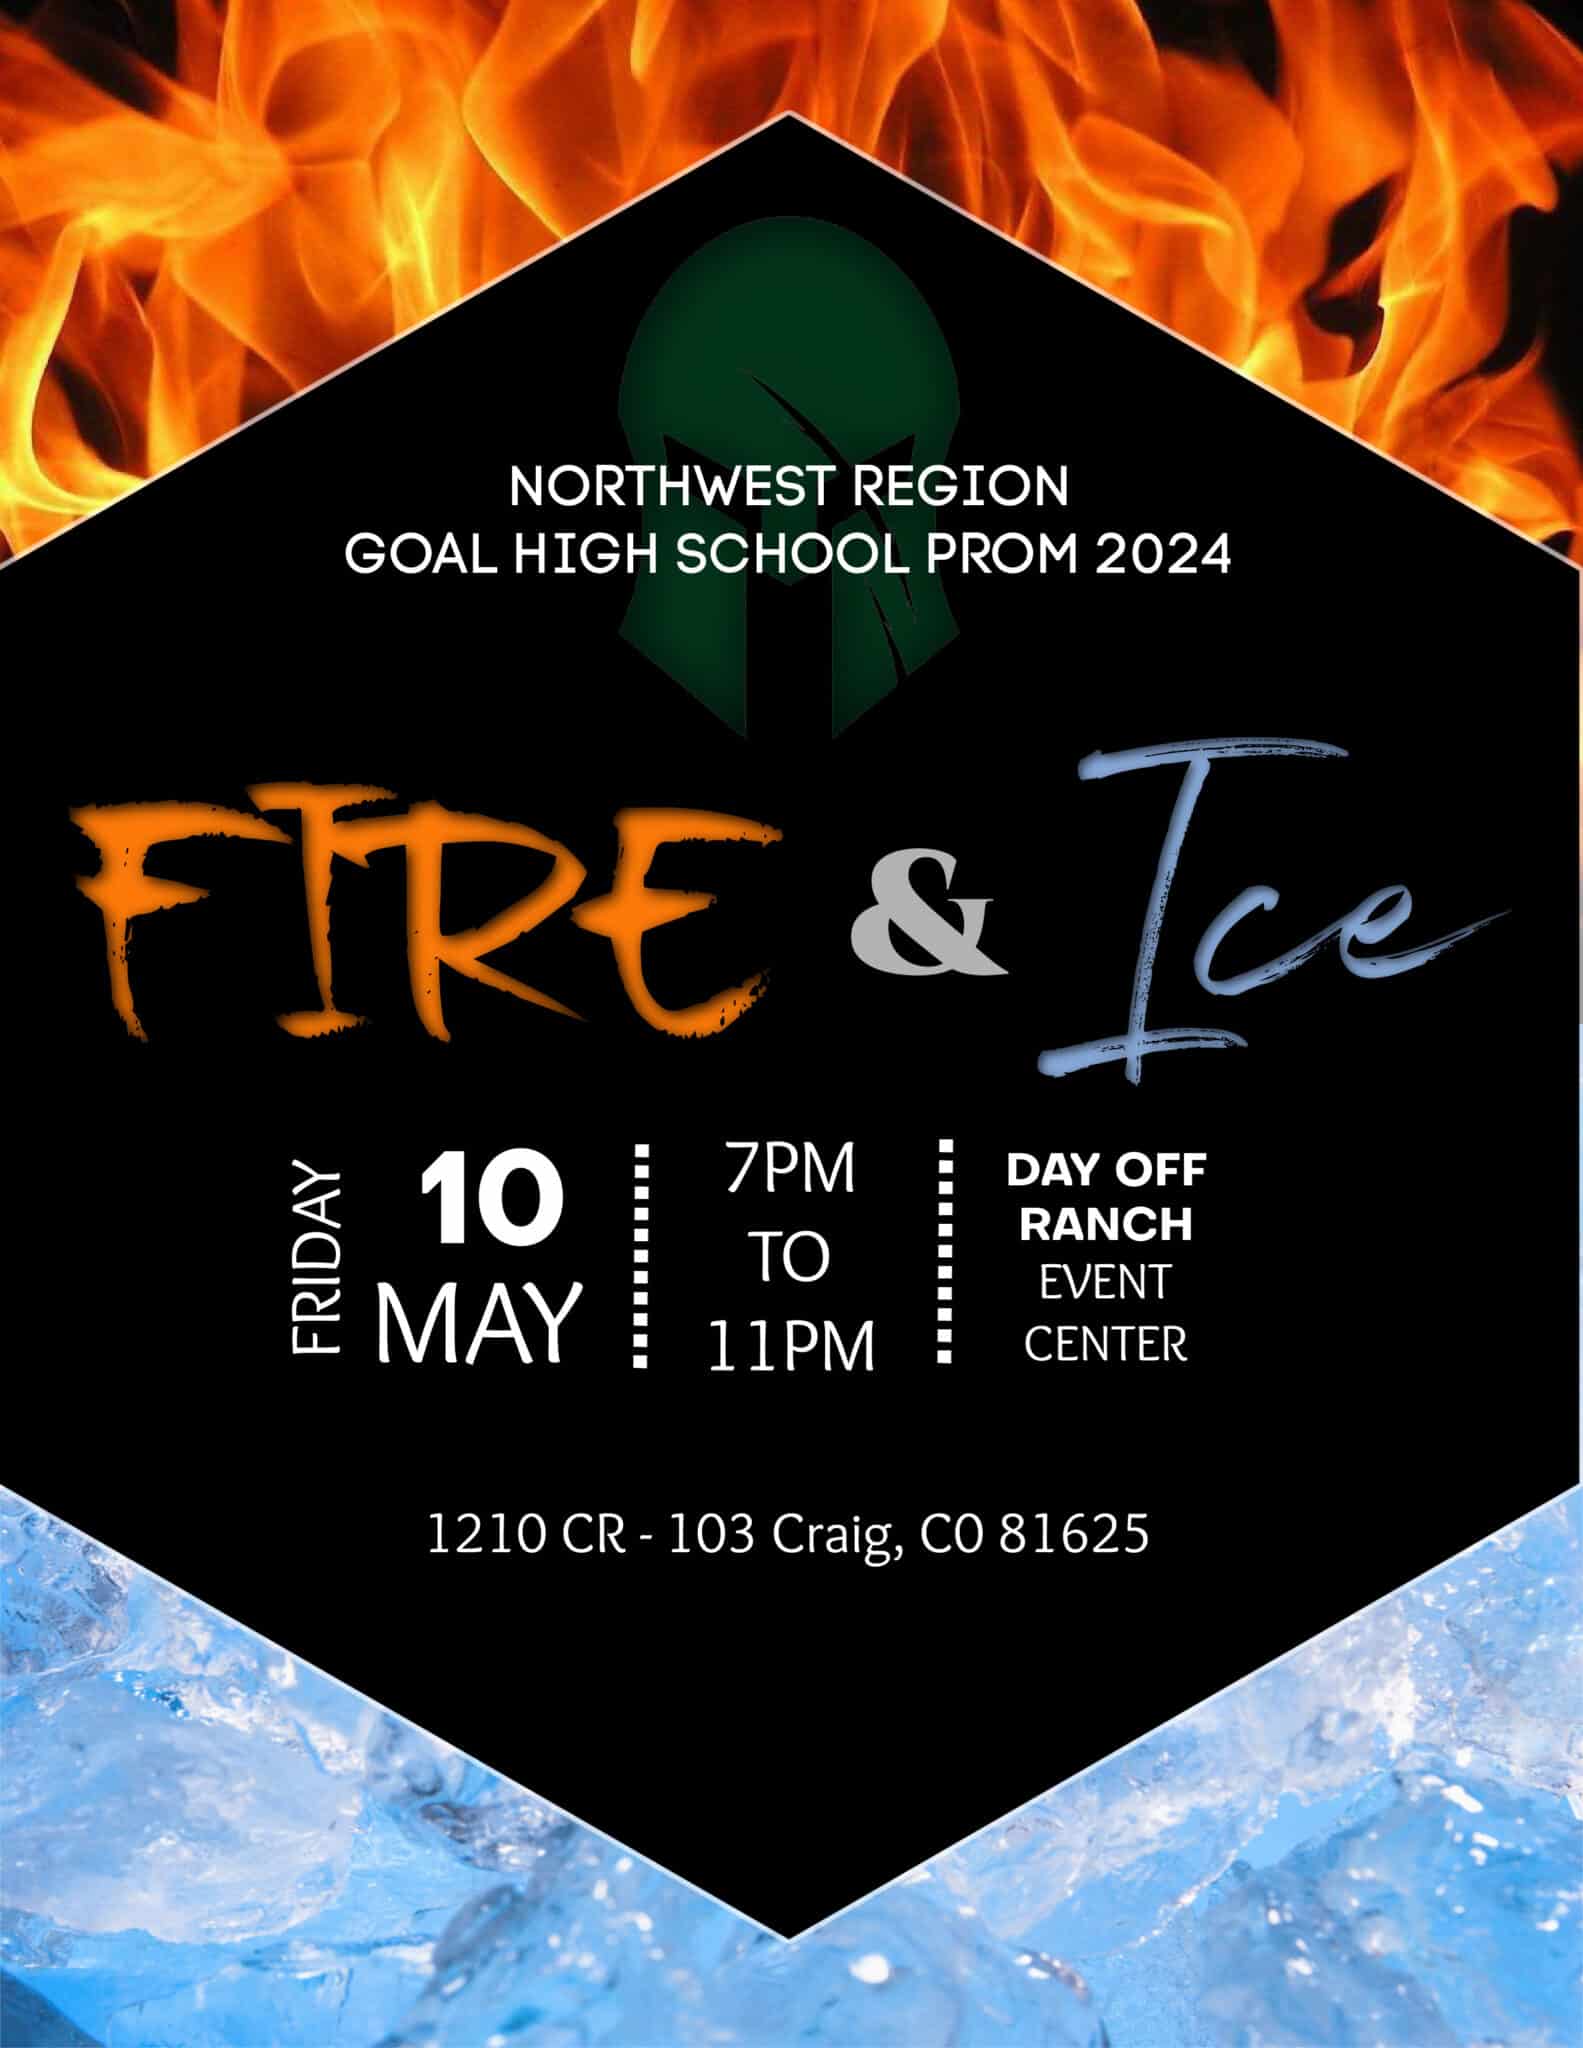 Northwest Region GOAL High School Prom 2024. Theme: Fire and Ice. Date: May 10, 2024. Time: 7:00pm-10:00pm. Location: Day Off Ranch Event Center, 1210 CR 103, Craig, CO 81625